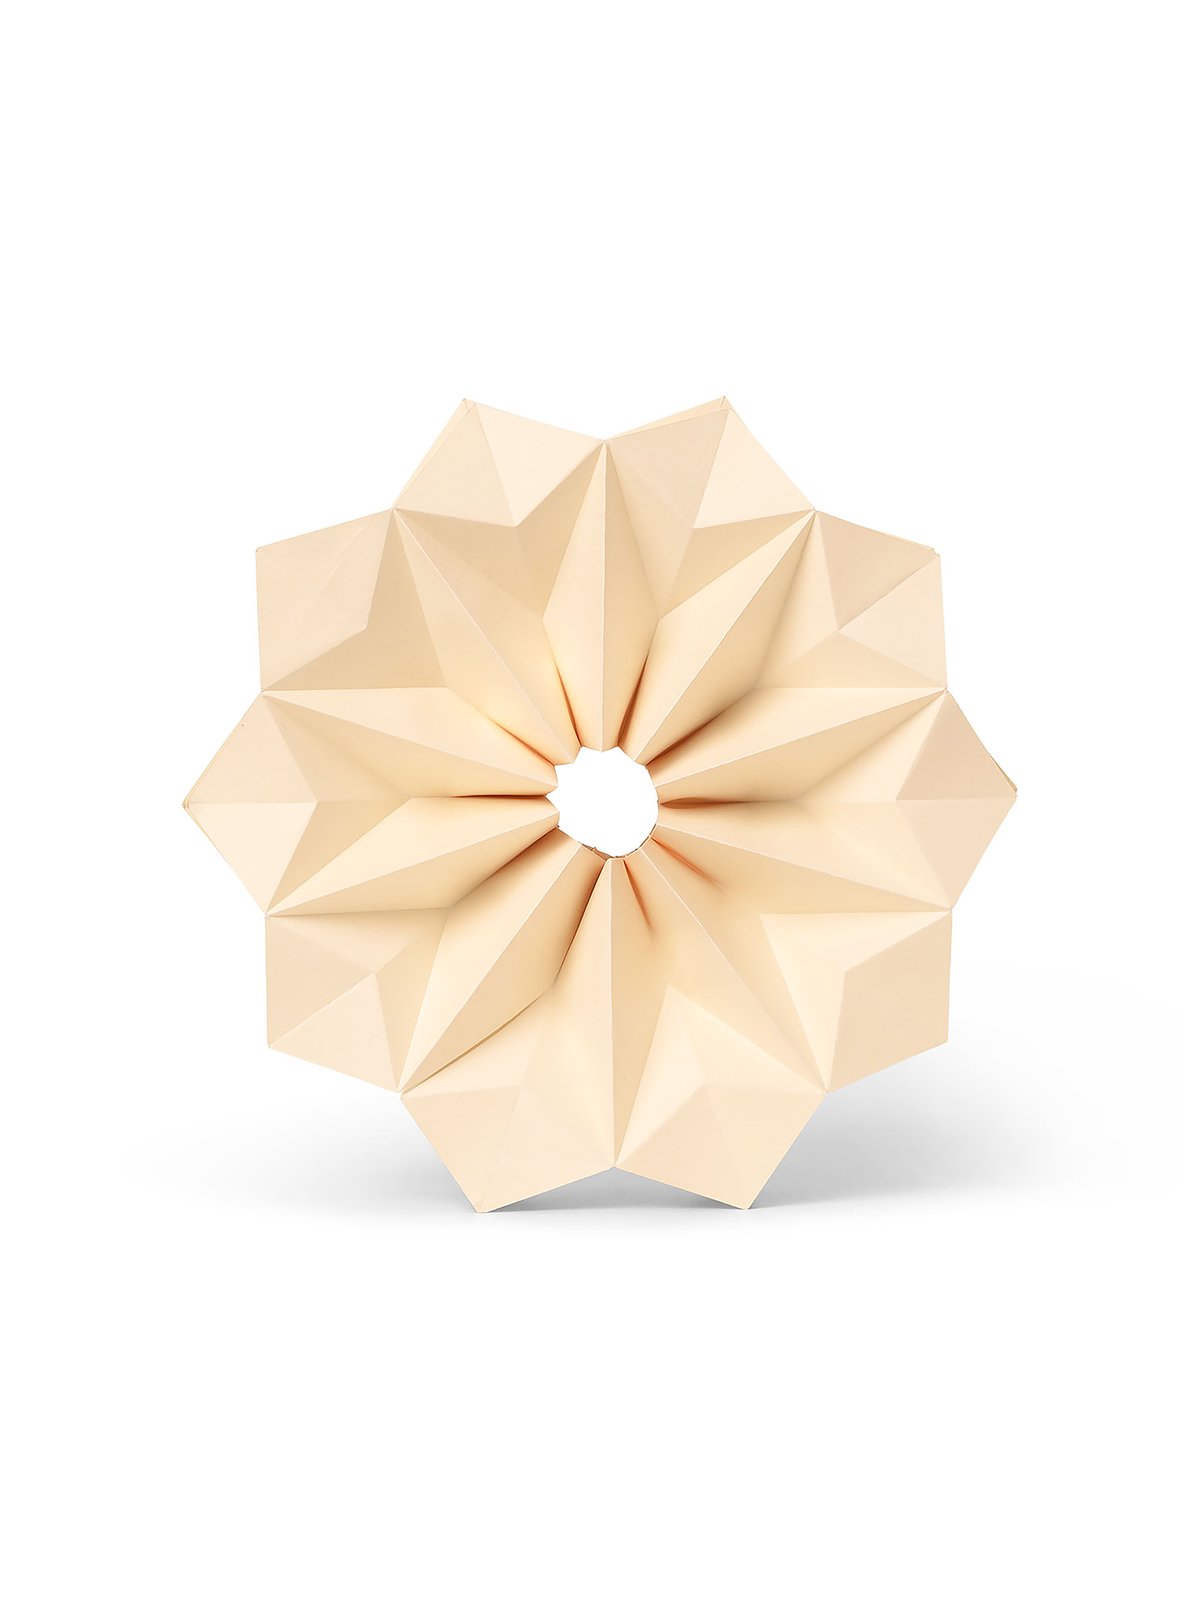 Paper Star | Sun | Tree Topper or as Ornament | by Ferm Living - Lifestory - ferm Living